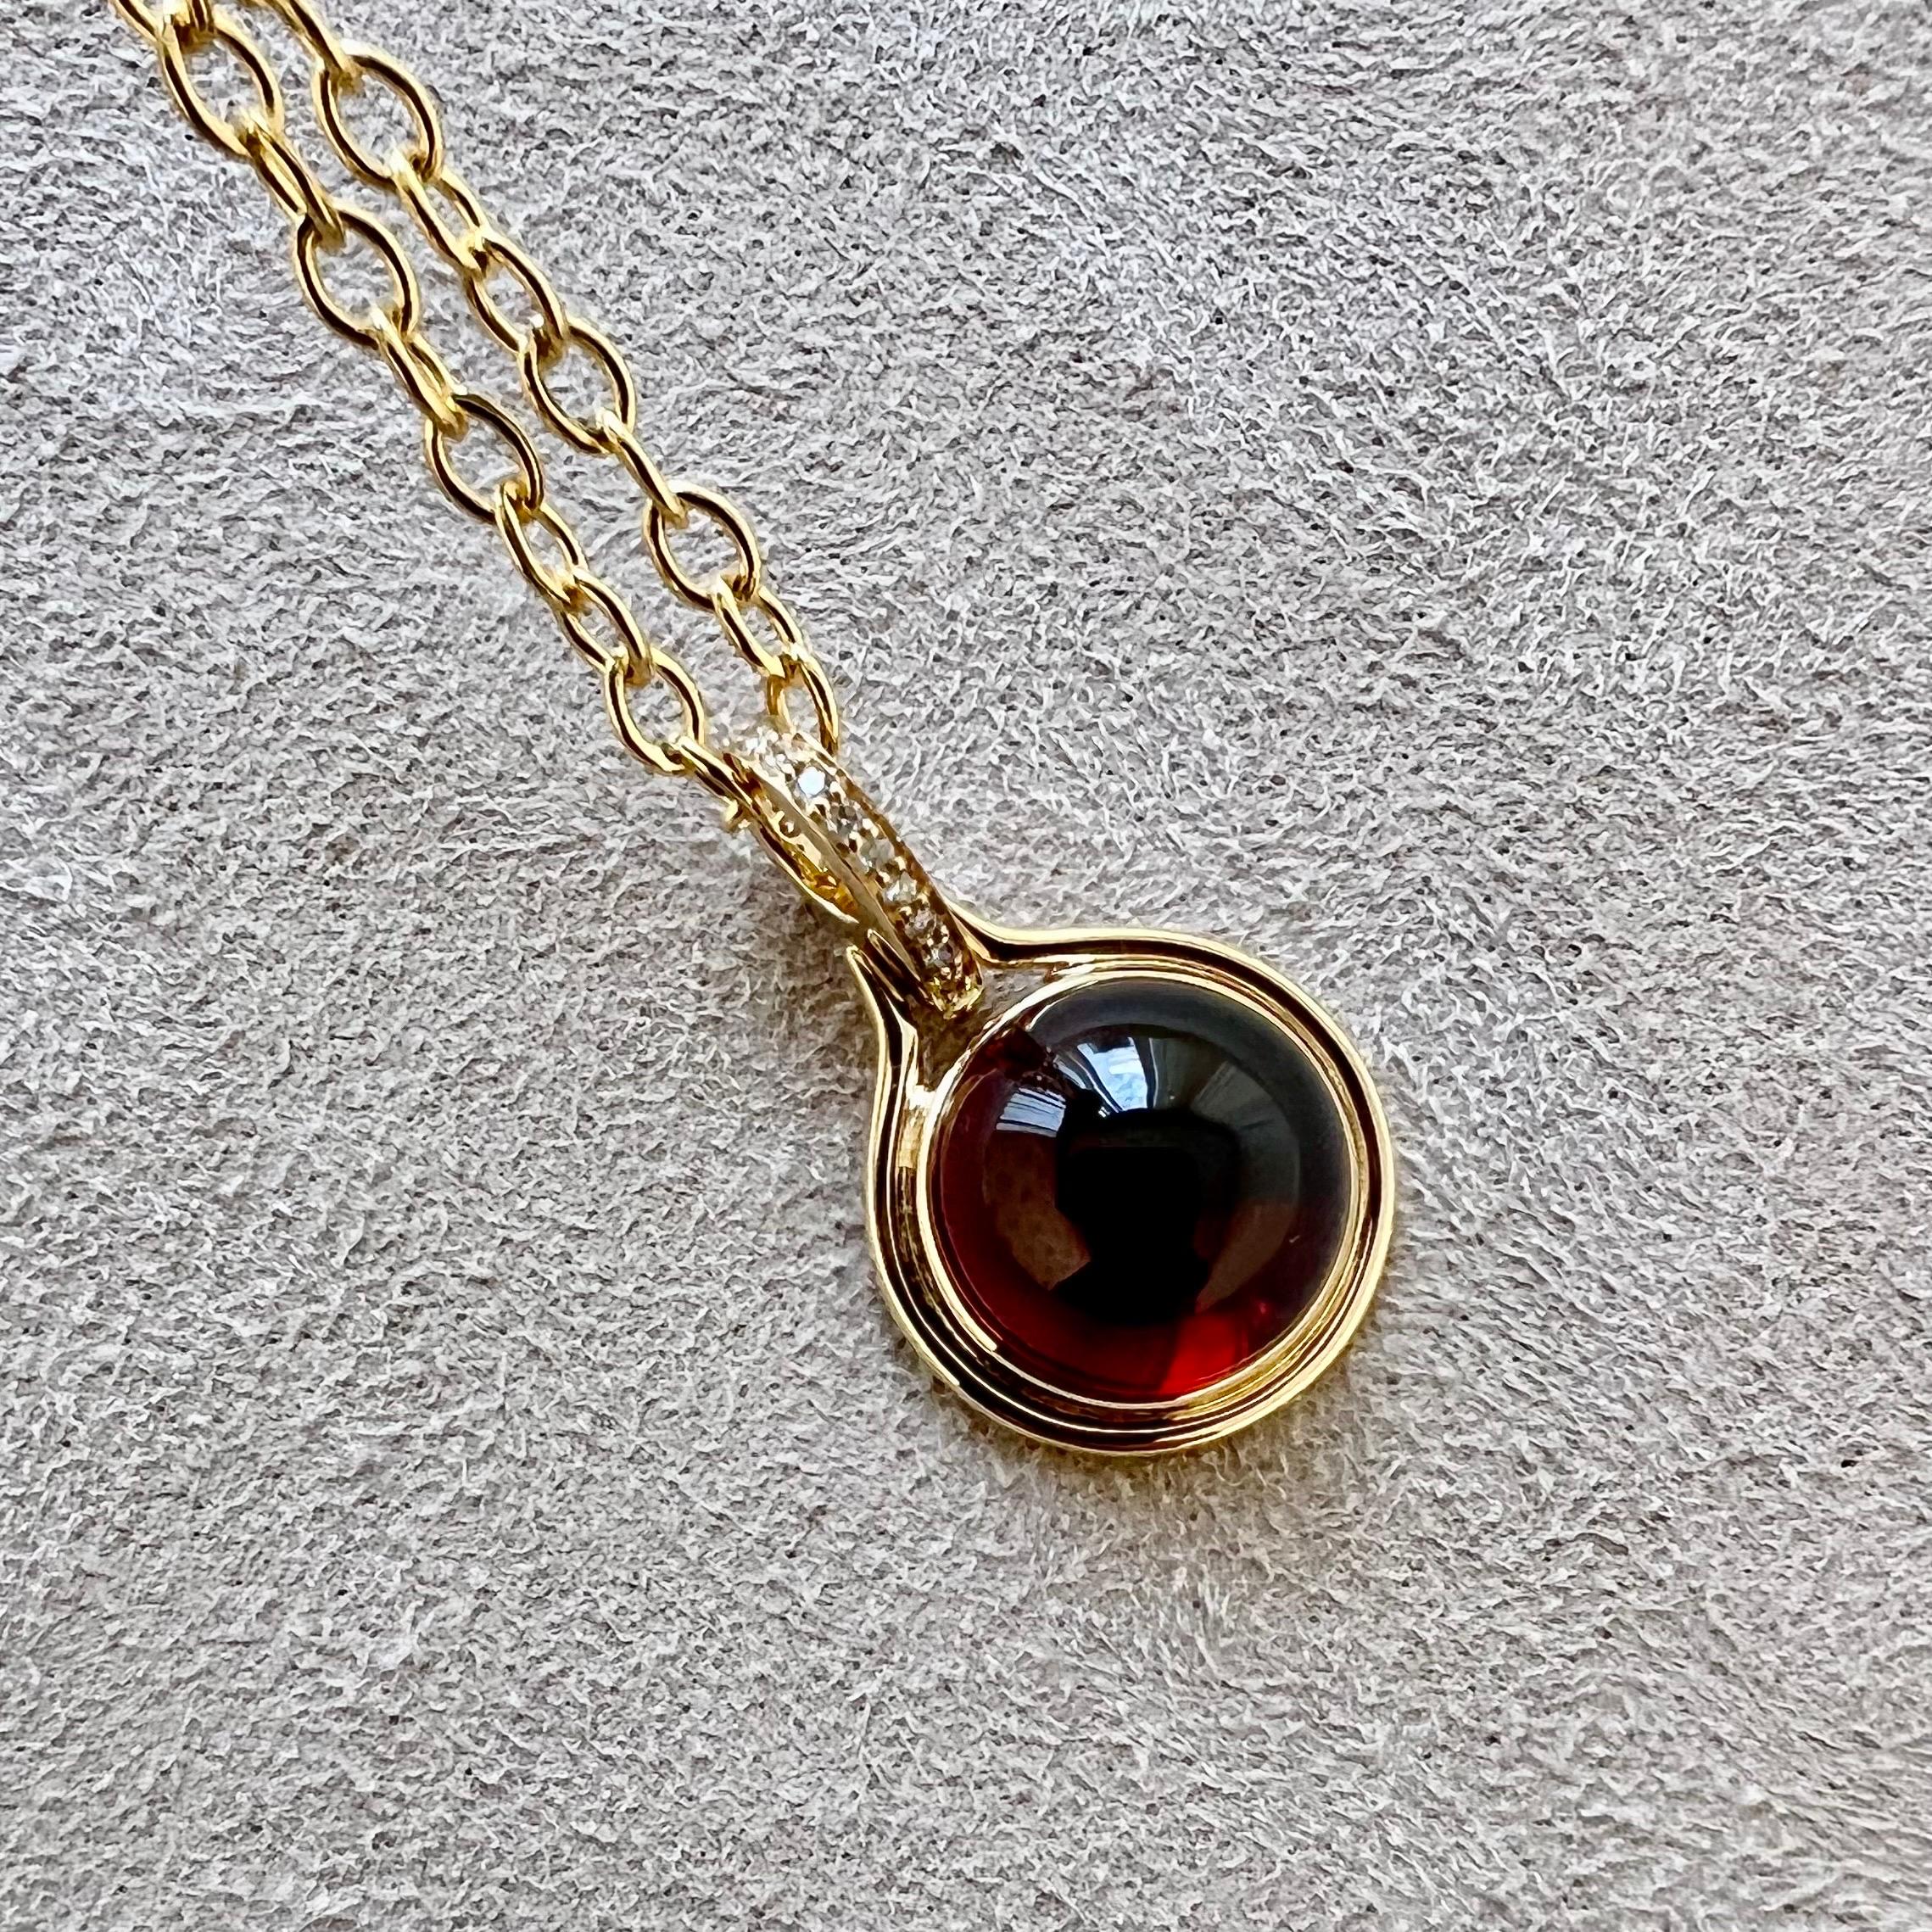 Created in 18 karat yellow gold
Rhodolite garnet 8 carats approx.
Diamonds 0.05 carat approx.
Limited edition
Chain sold separately

Crafted in luxurious 18 karat yellow gold, this limited edition pendant sparkles with an 8 carat Rhodolite garnet